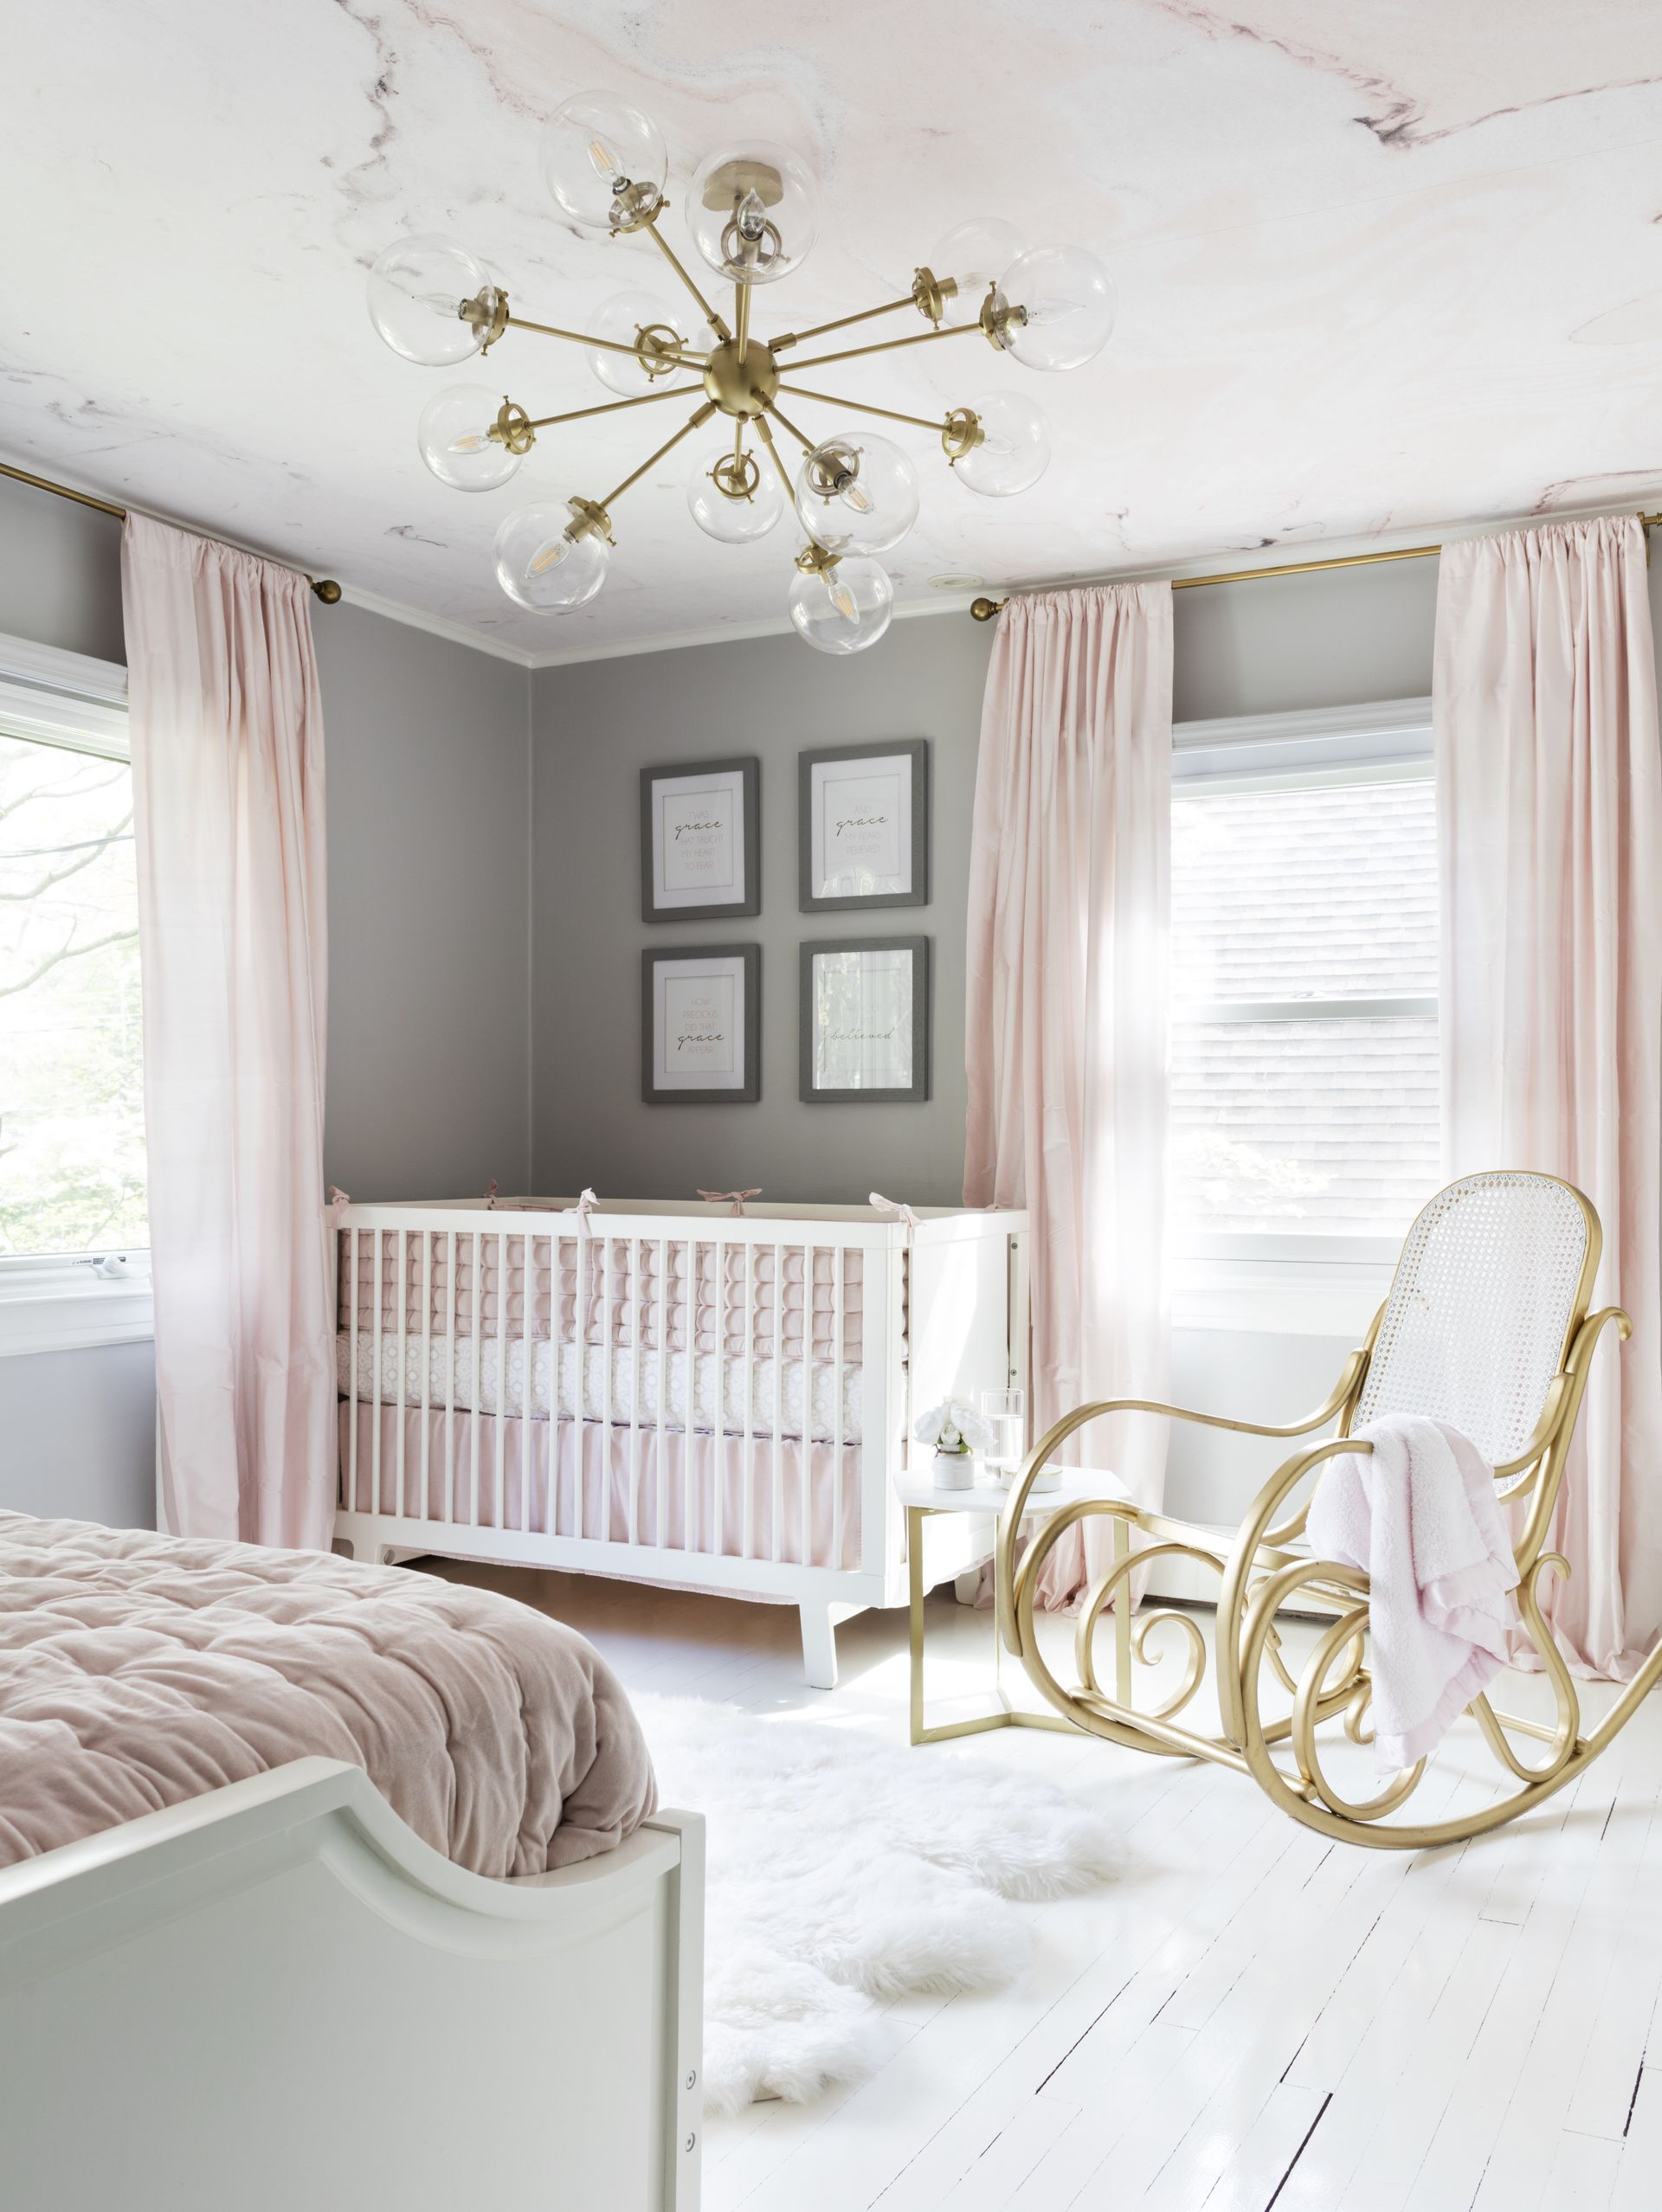 <p>                     Decorating with grey has become de rigueur in interior design, and works wonderfully when paired with pink in a baby girl's nursery. Undeniably the new but enduring neutral, this cool color adds a sophisticated edge, elegance and a refinement to a nursery room, and is a go-to for anyone who wants an easy-to-live with tone that's easy to color scheme and redecorate around.                   </p>                                      <p>                     Due to its versatility, most colors go with grey – it is a neutral after all, which means it acts like a blank canvas on which you can put your mark. Texture plays an important part in grey rooms, too.                   </p>